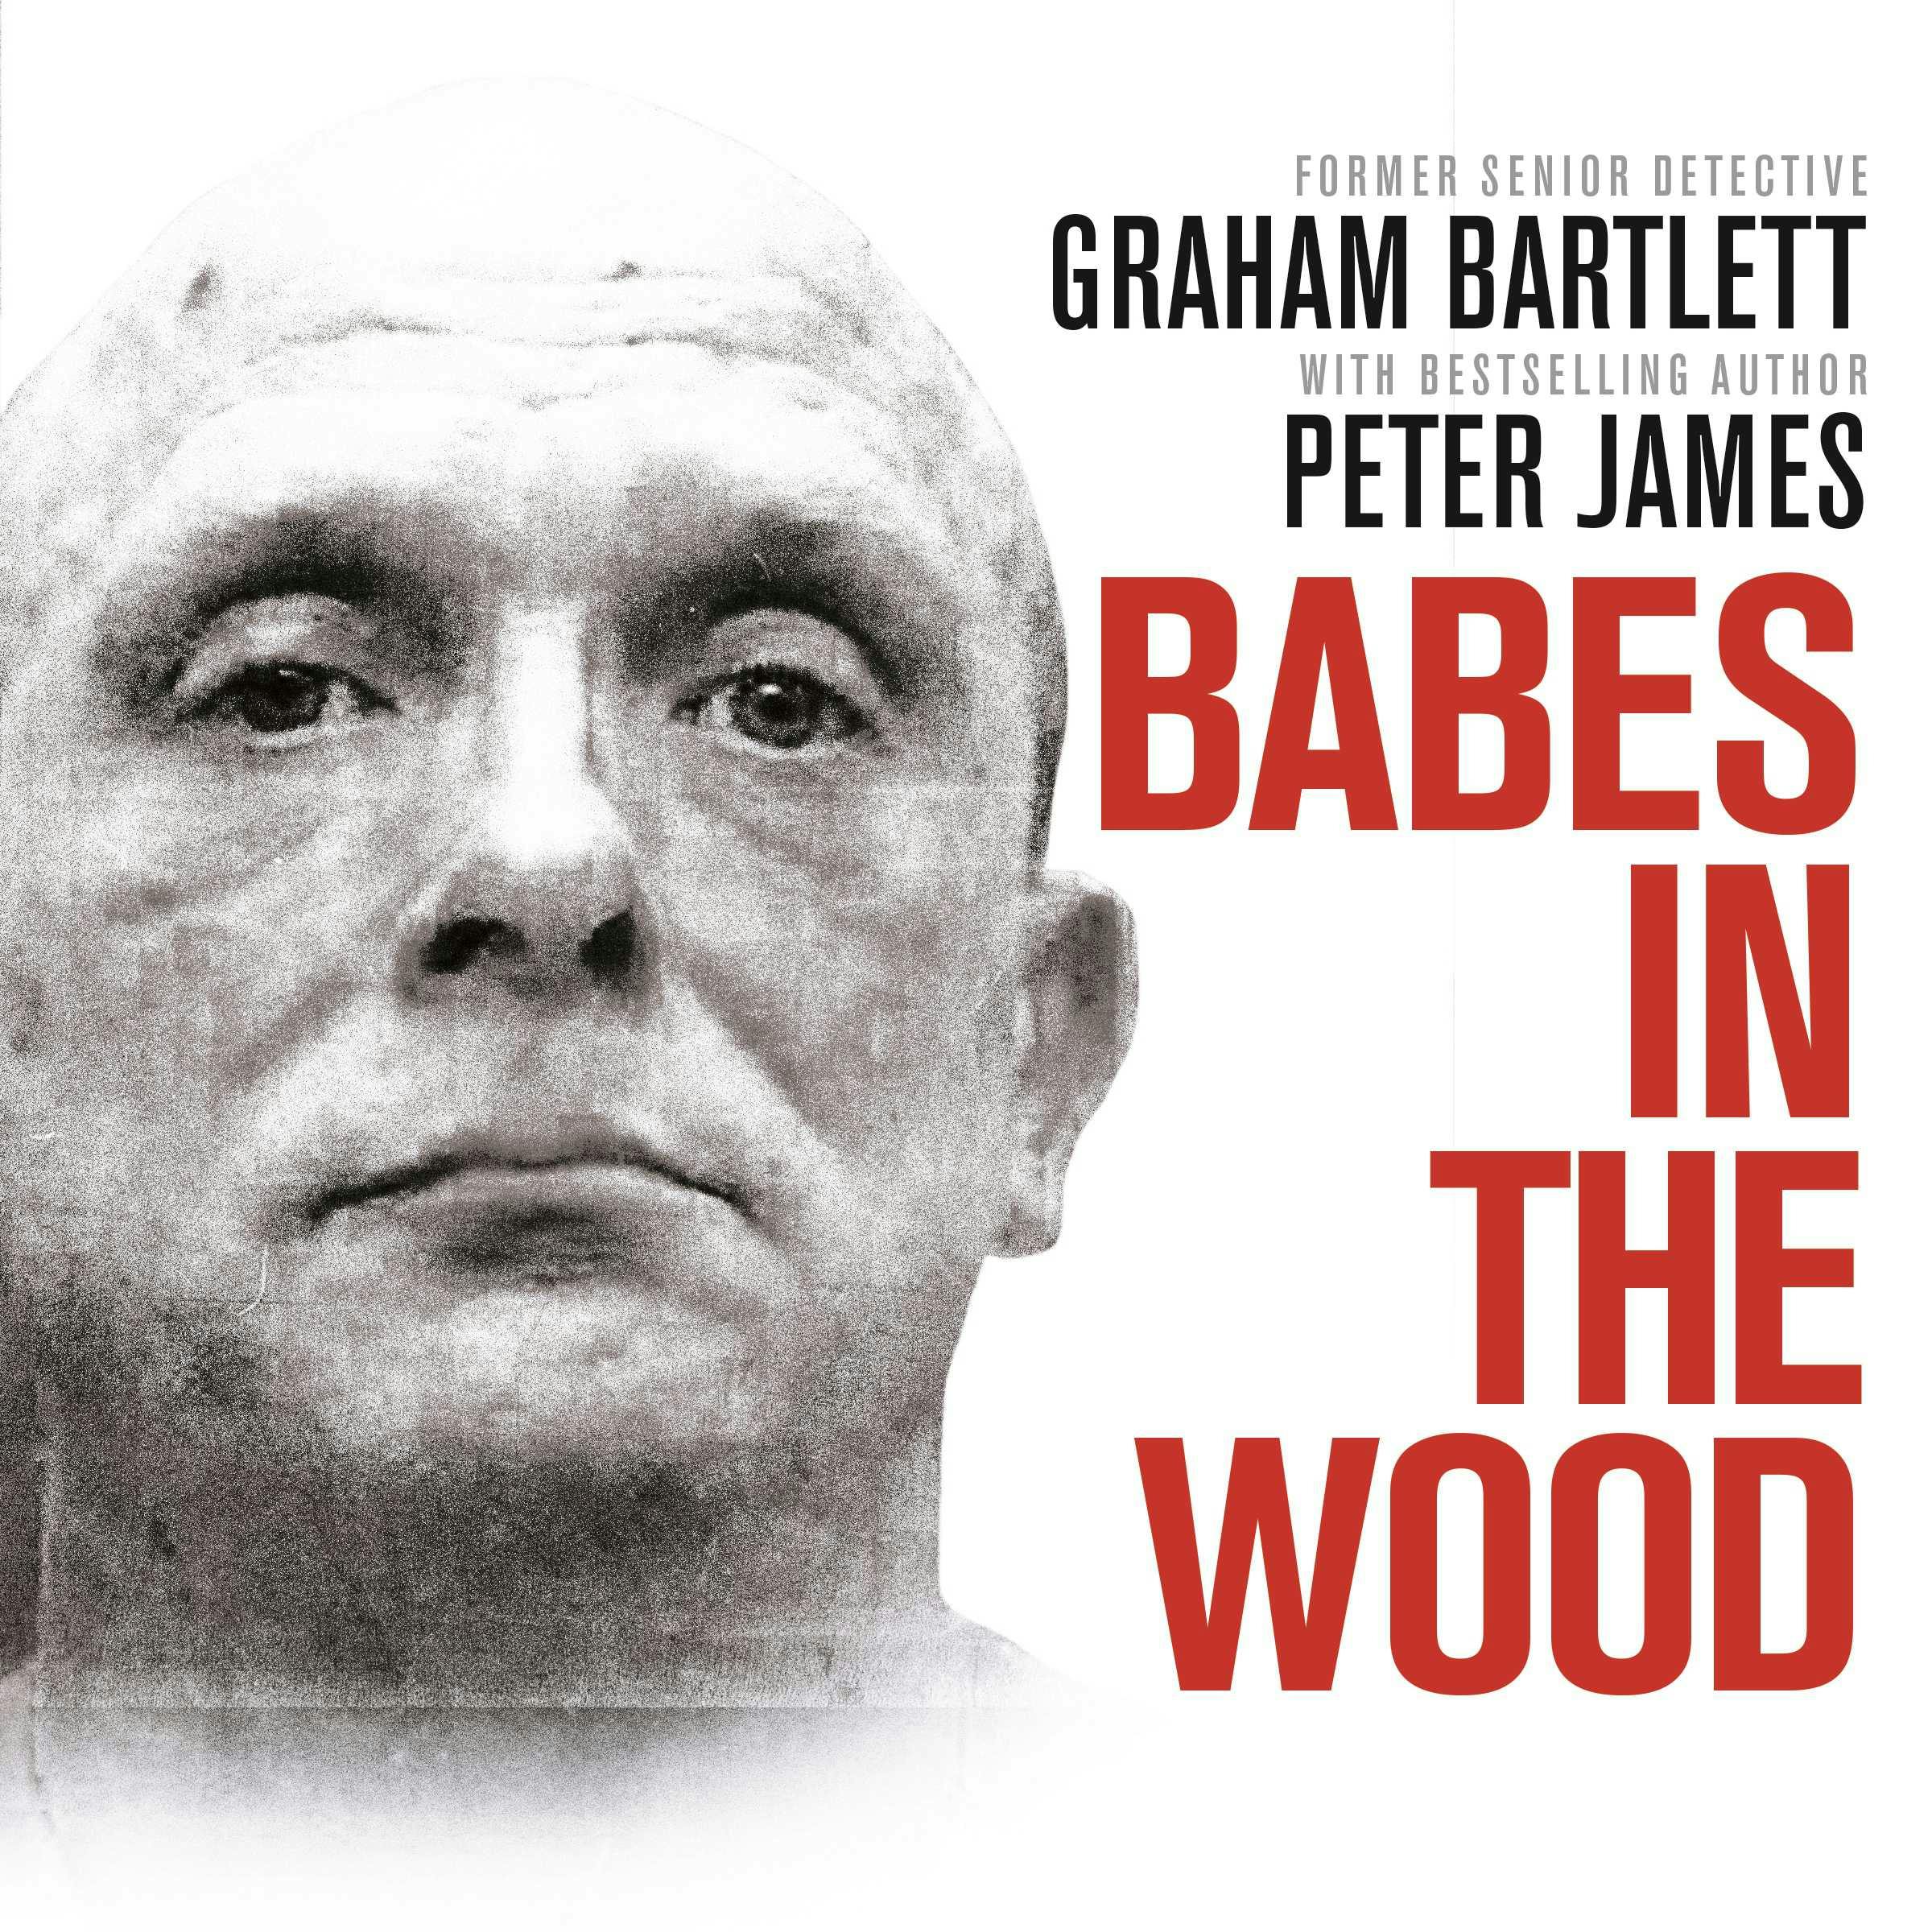 Babes in the Wood: Two girls murdered. A guilty man walks free. Can the police get justice? - Graham Bartlett